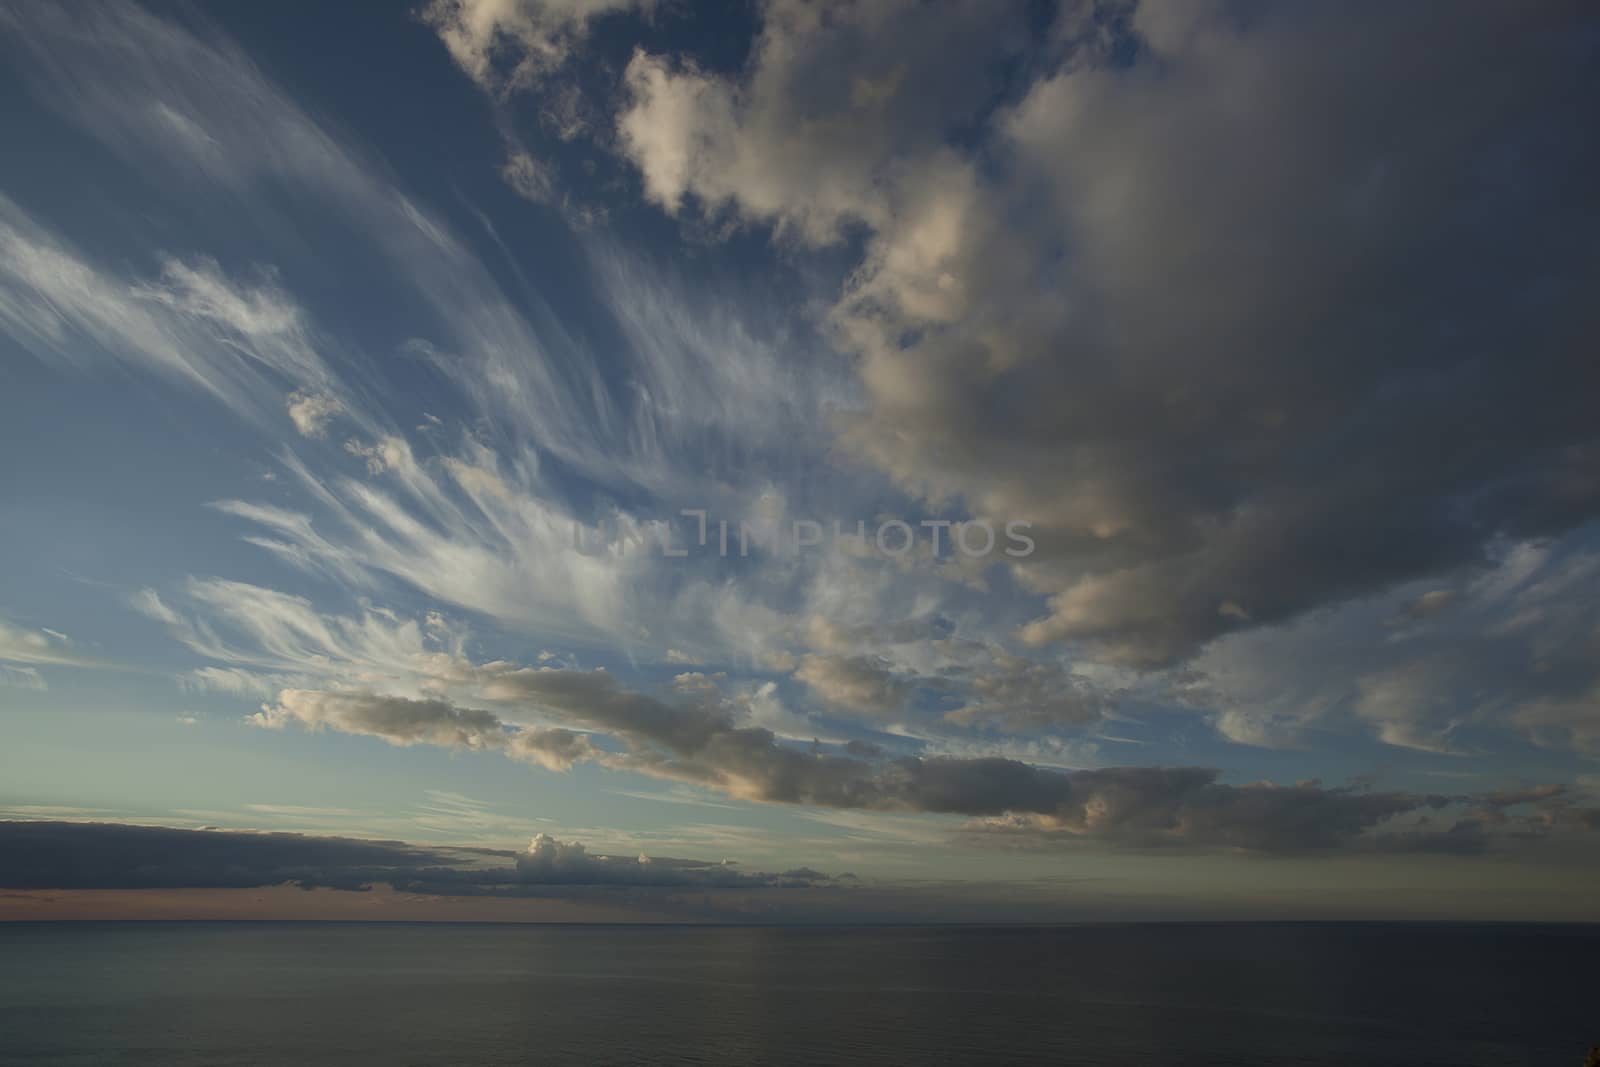 Panorama of clouds against the blue sky over the sea.